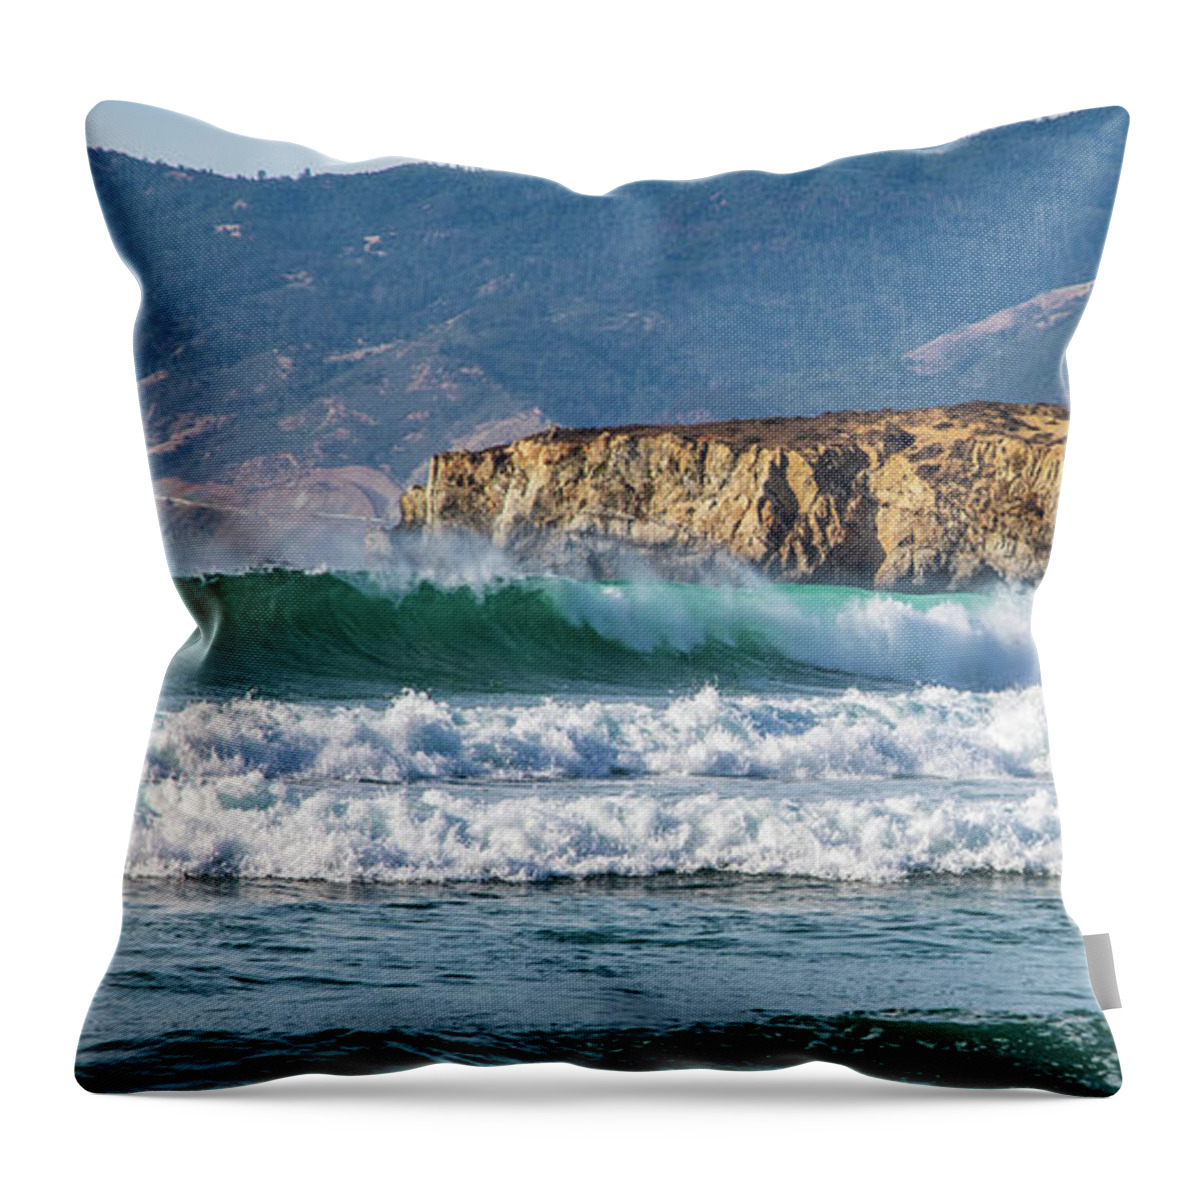 Surf Throw Pillow featuring the photograph Sick Nugs Dude by Stephen Sloan